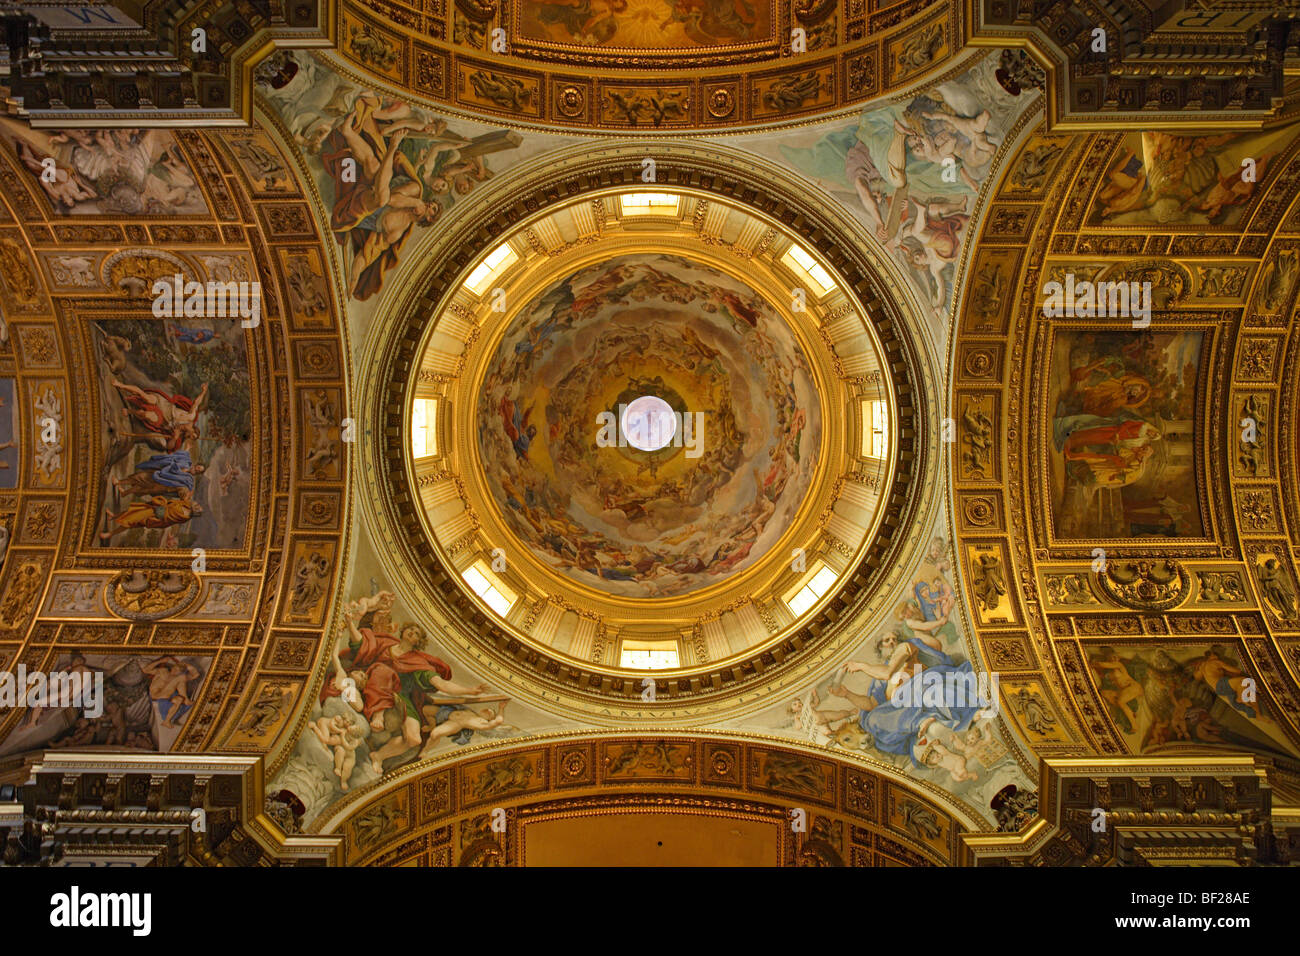 Interior view of the church S. Andrea della Valle, view at the ceiling, Rome, Italy, Europe Stock Photo